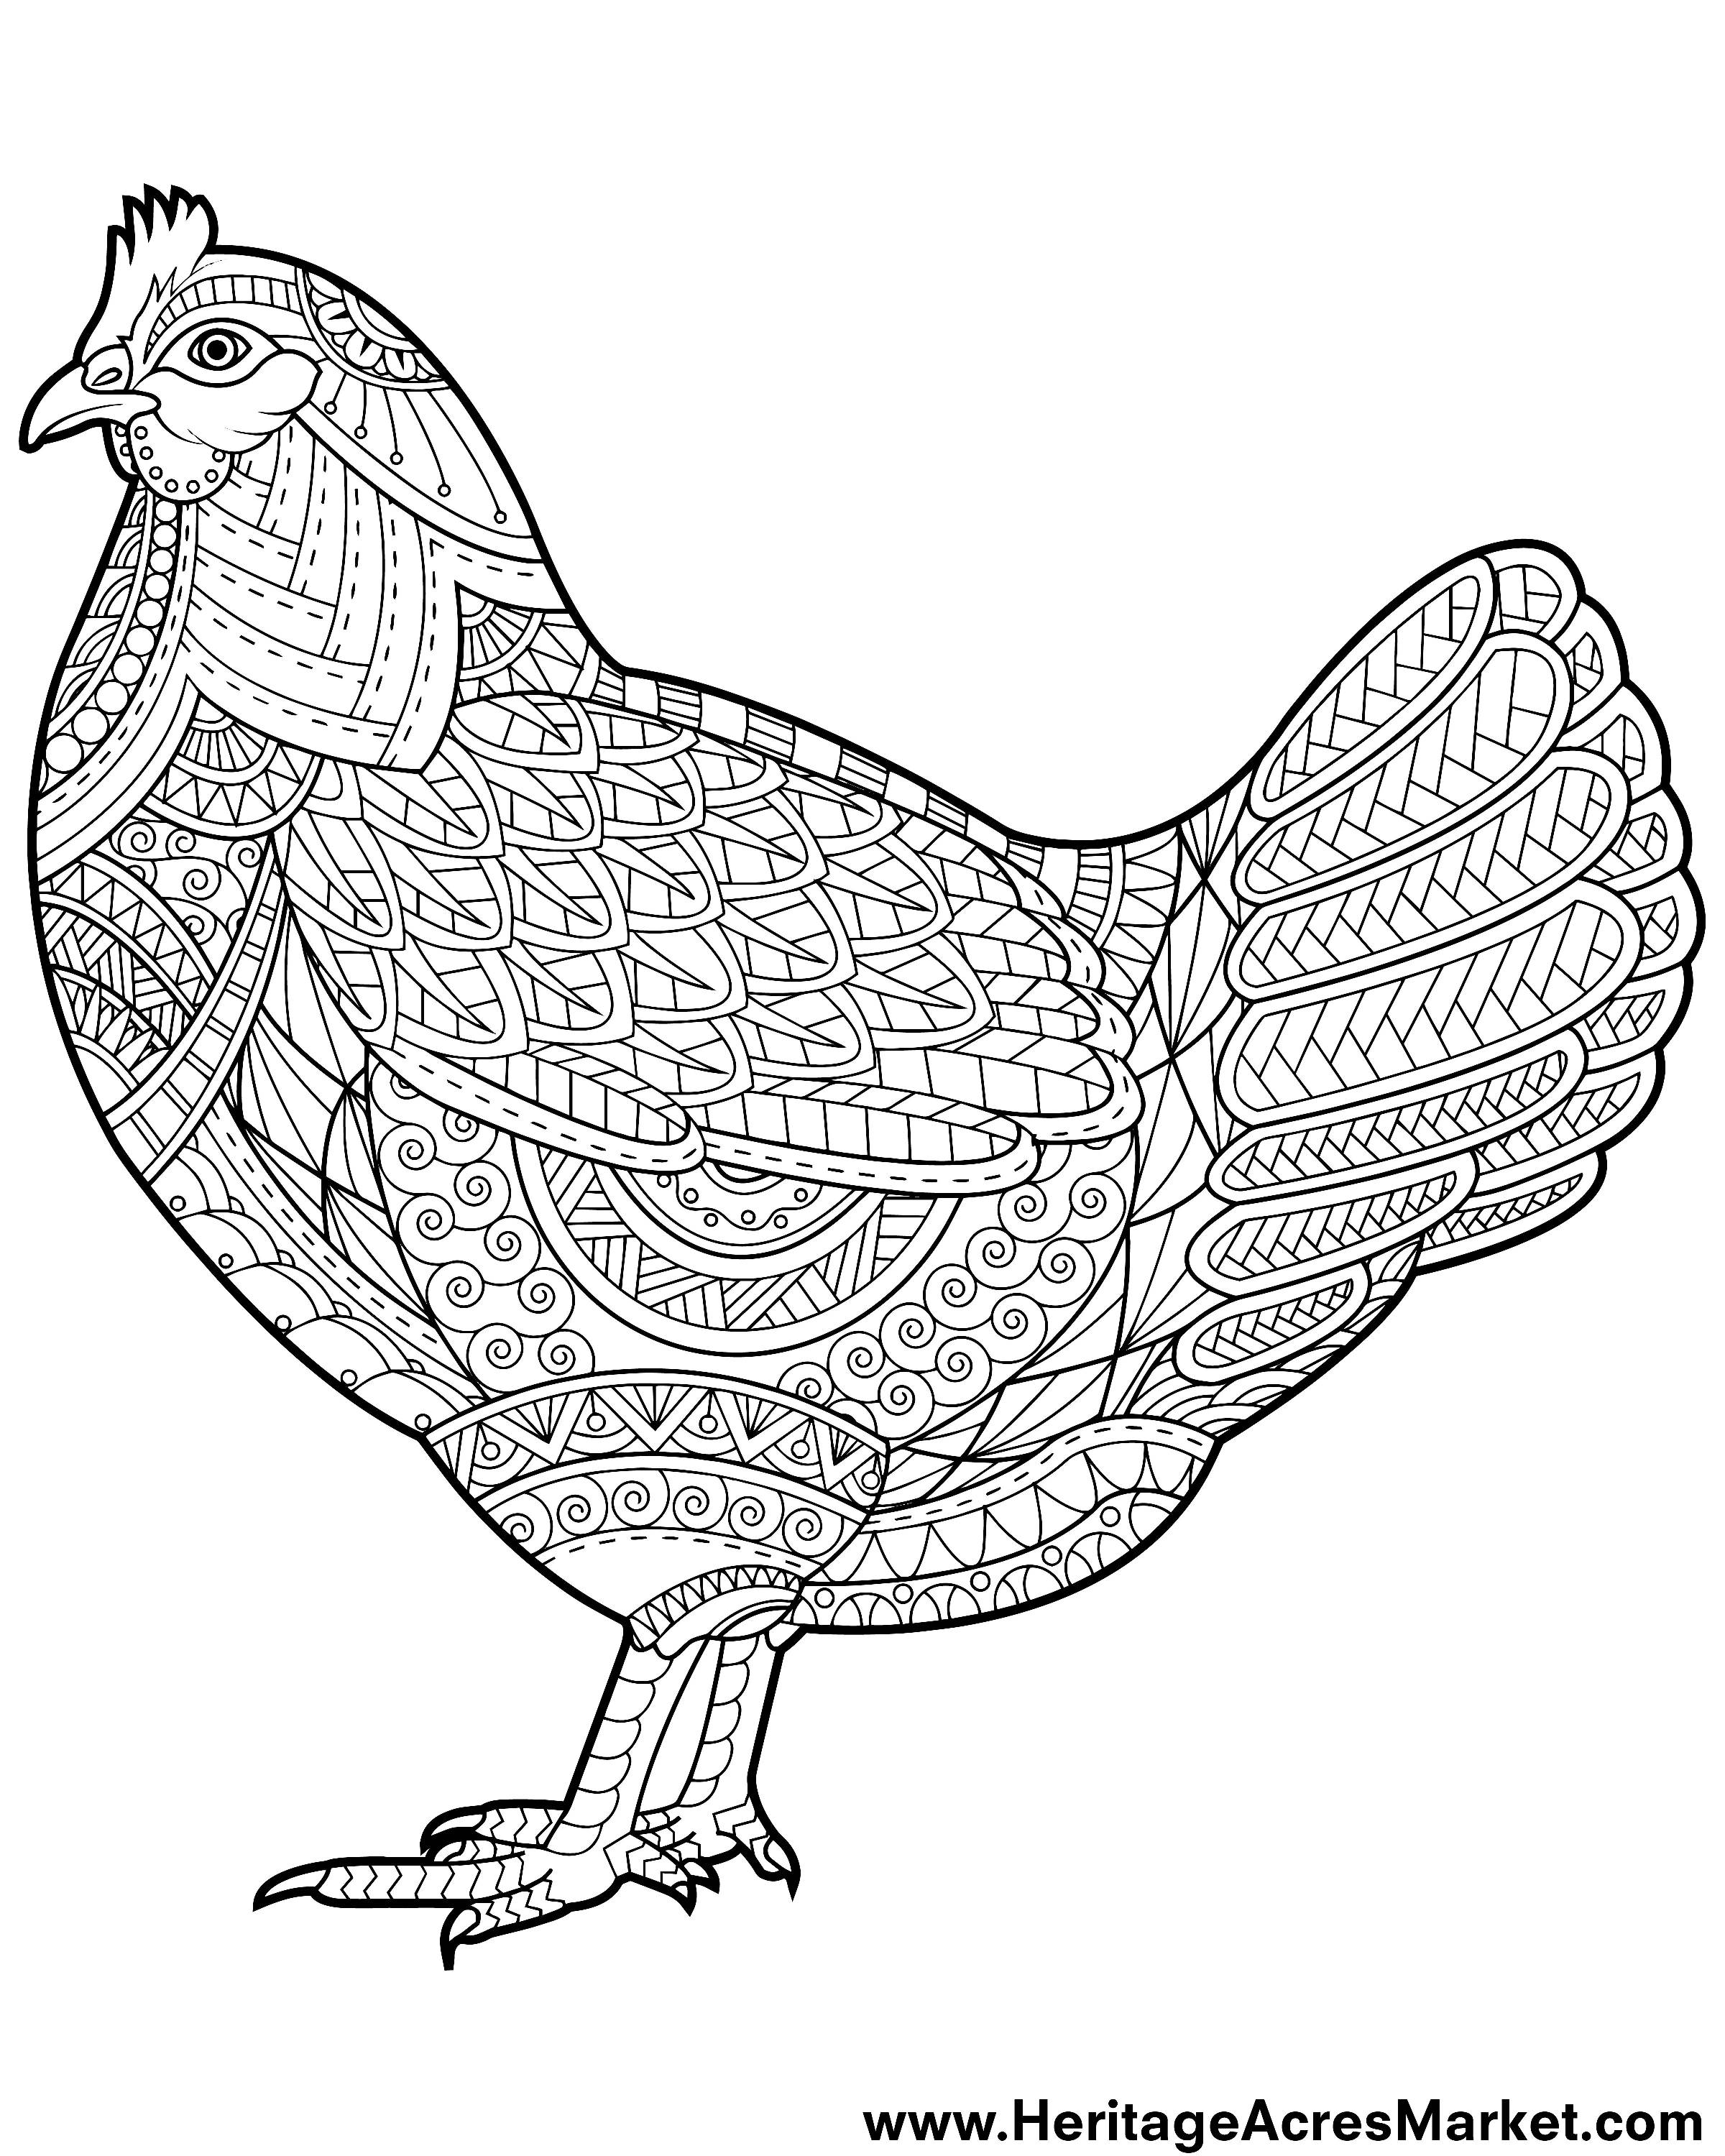 week-3-free-coloring-page-funky-chicken-heritage-acres-market-llc